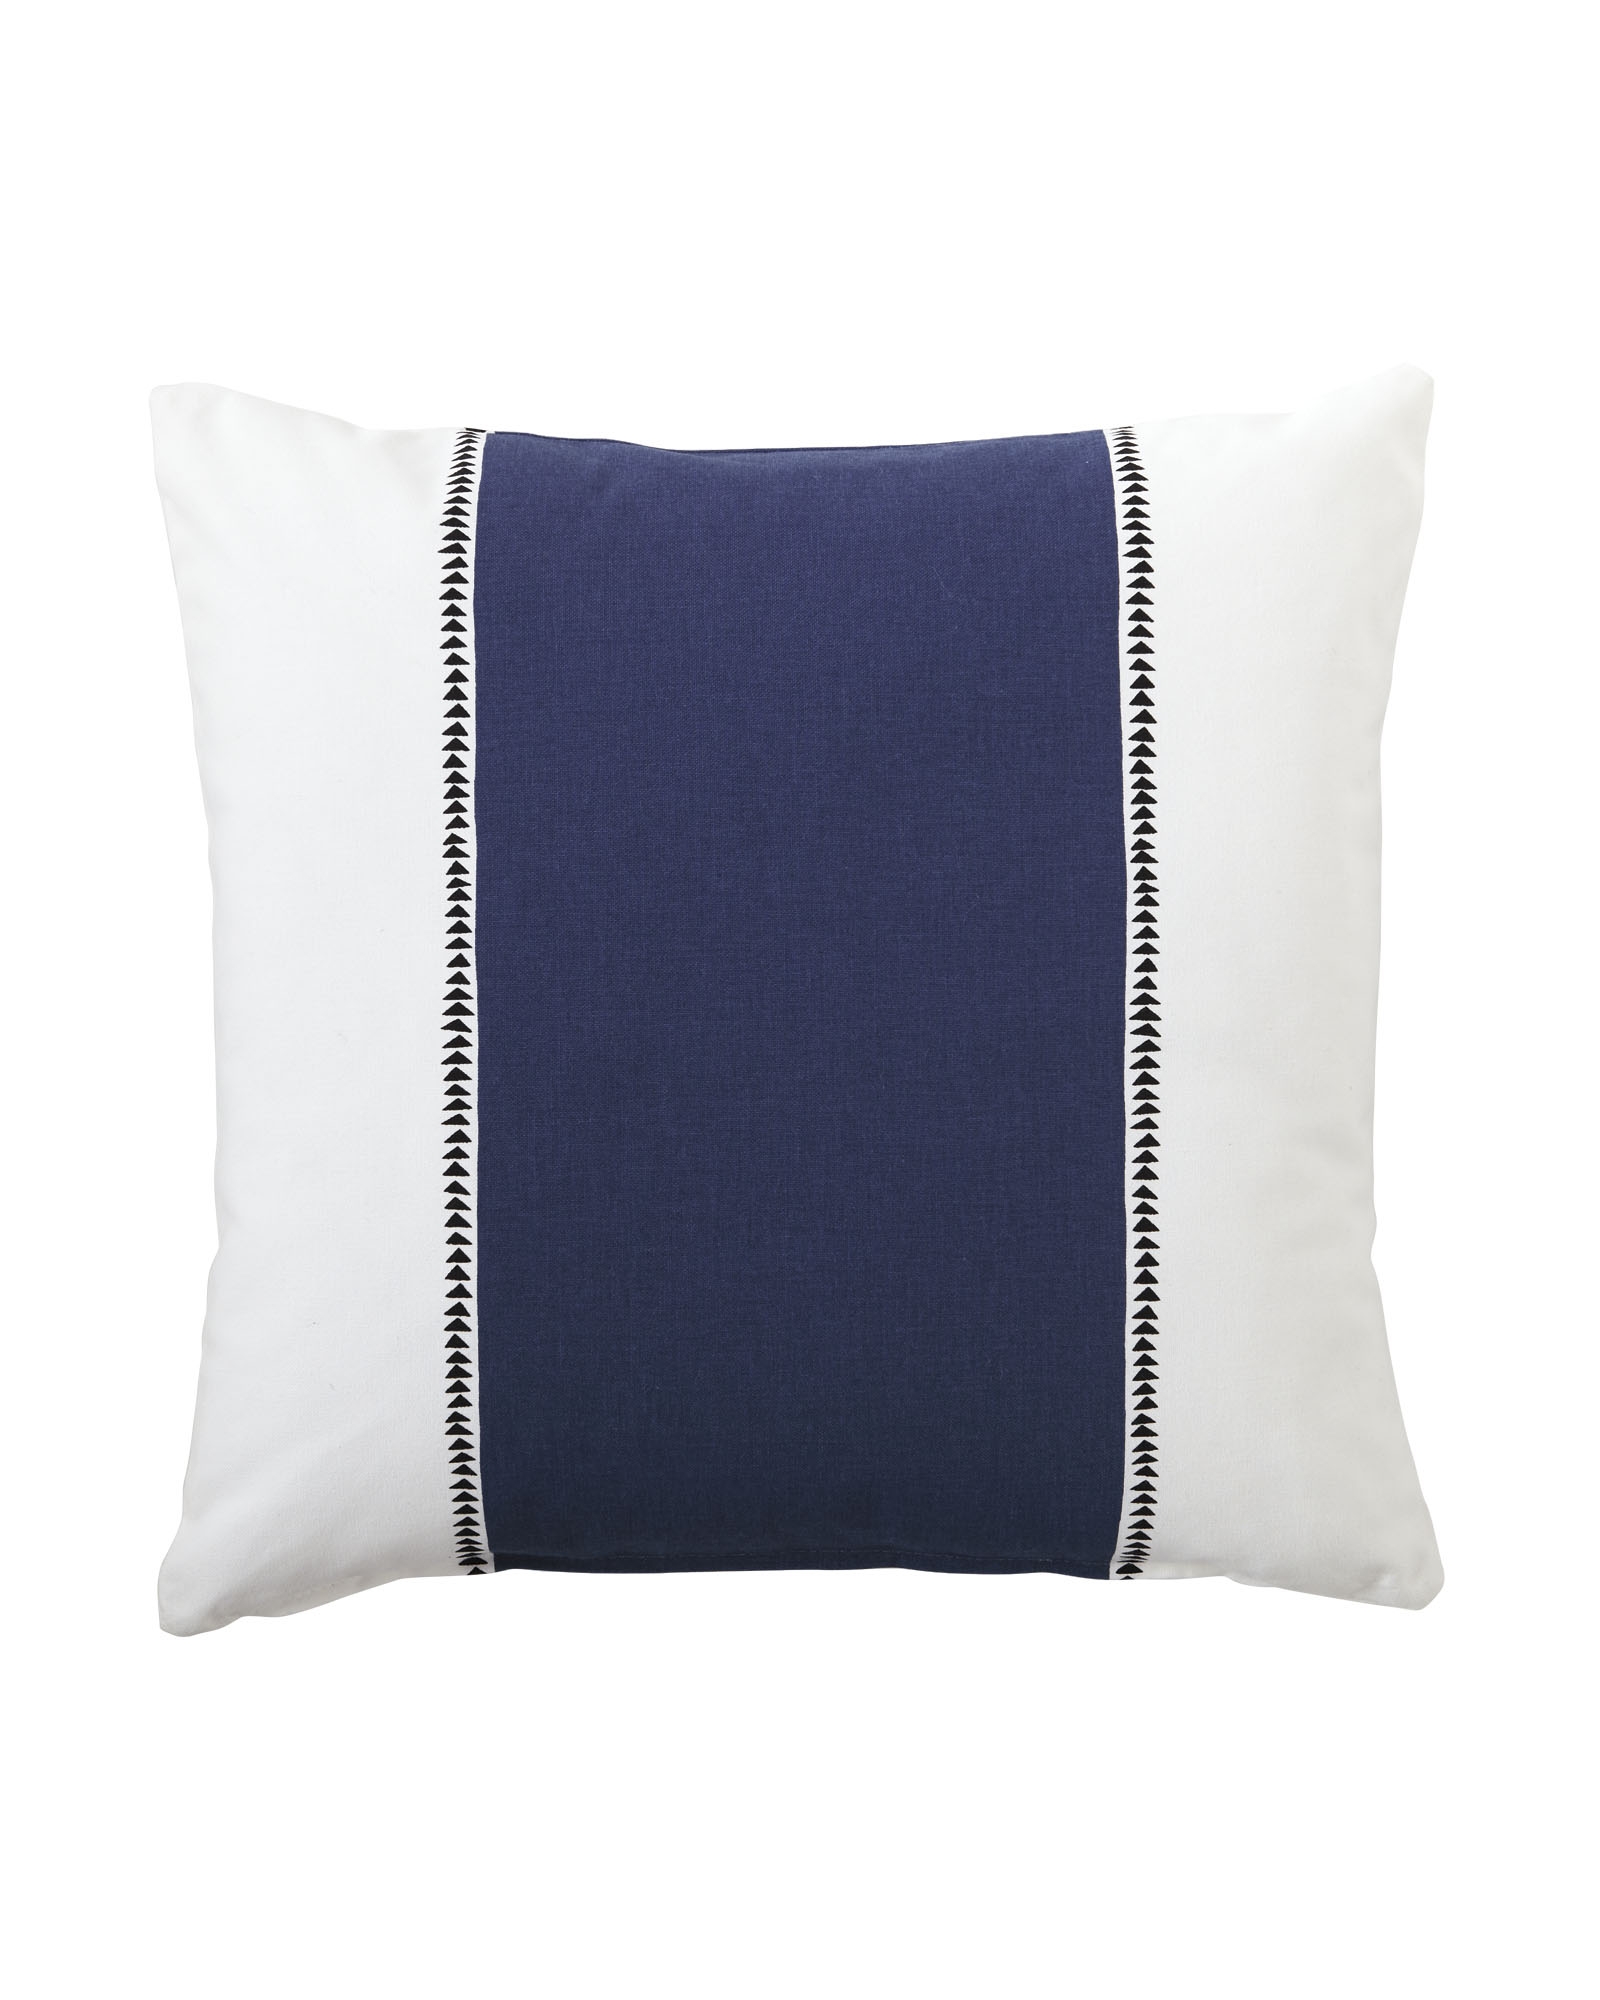 Racing Stripe Pillow Cover - Navy - 20"SQ - Insert sold separately - Image 0